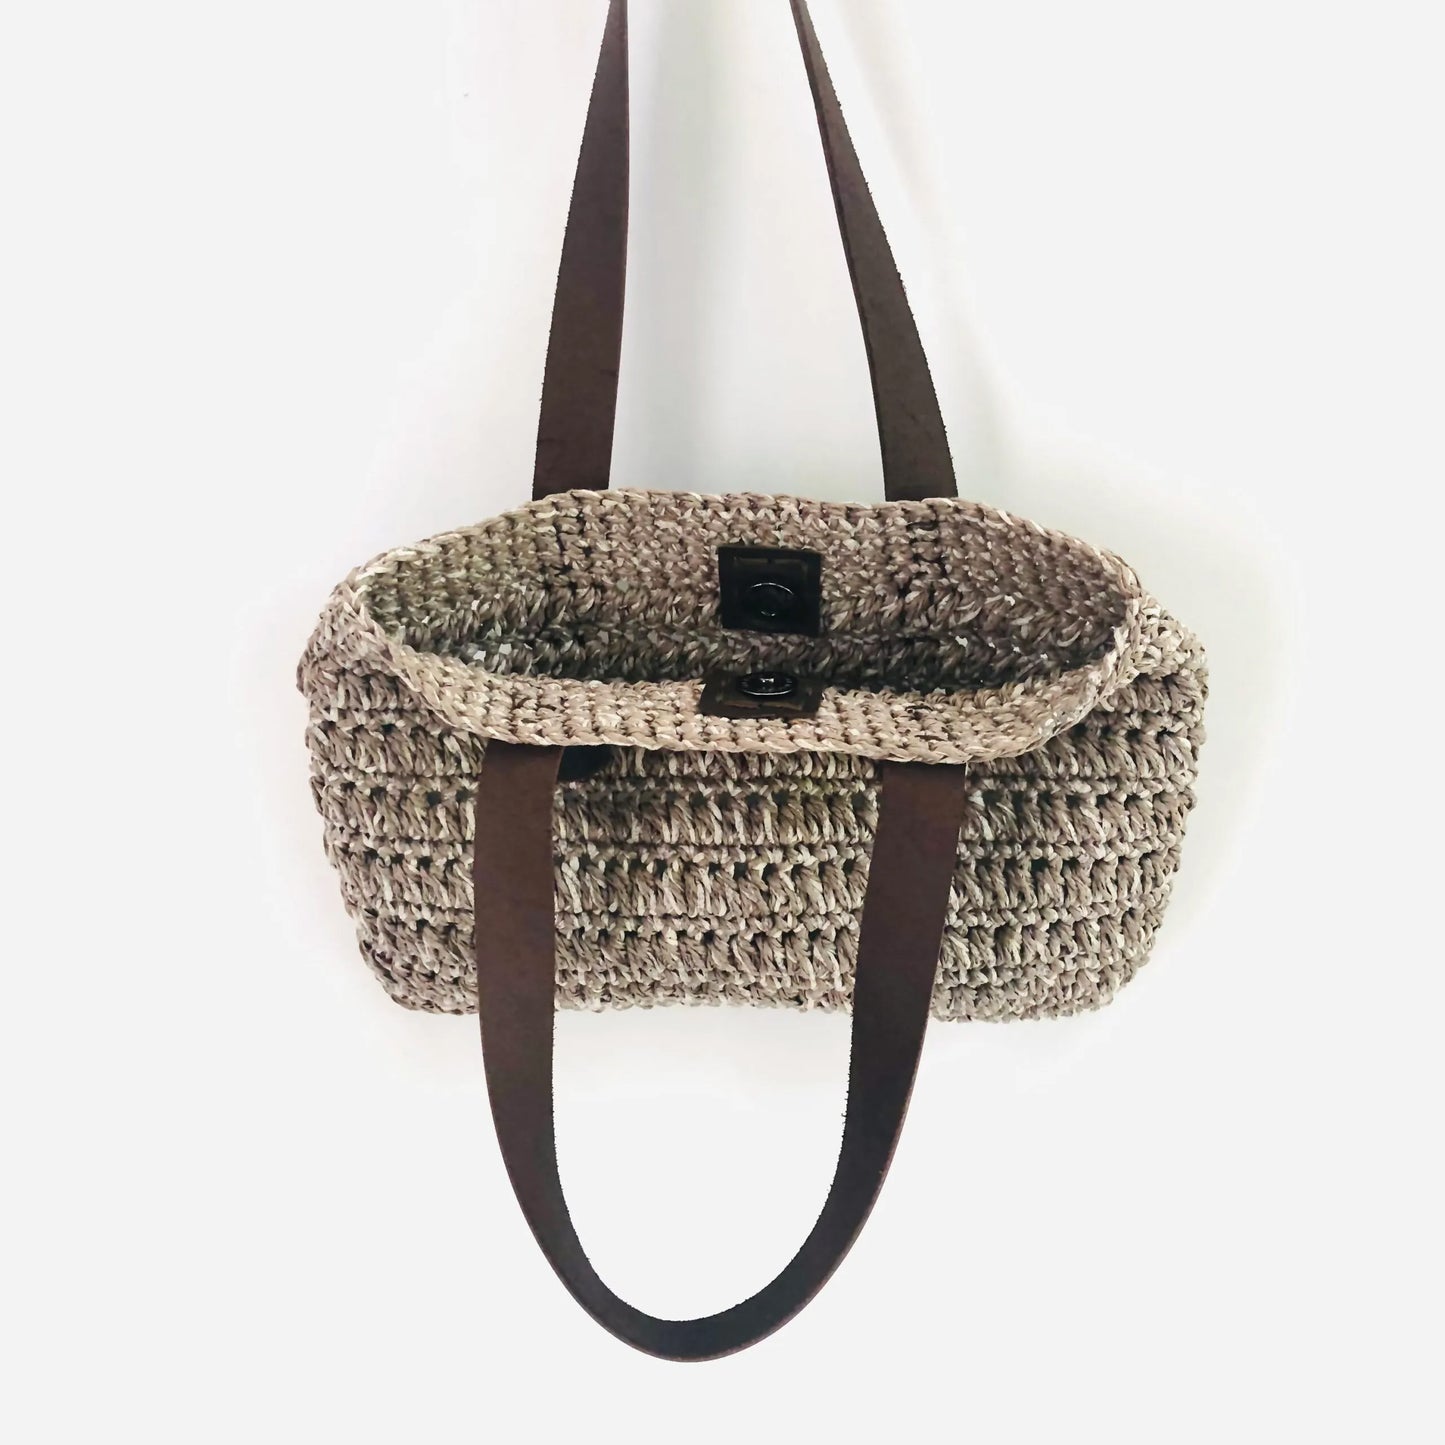 Hand-Made Hand Knitted Hand Bag With Leather Eco Handles